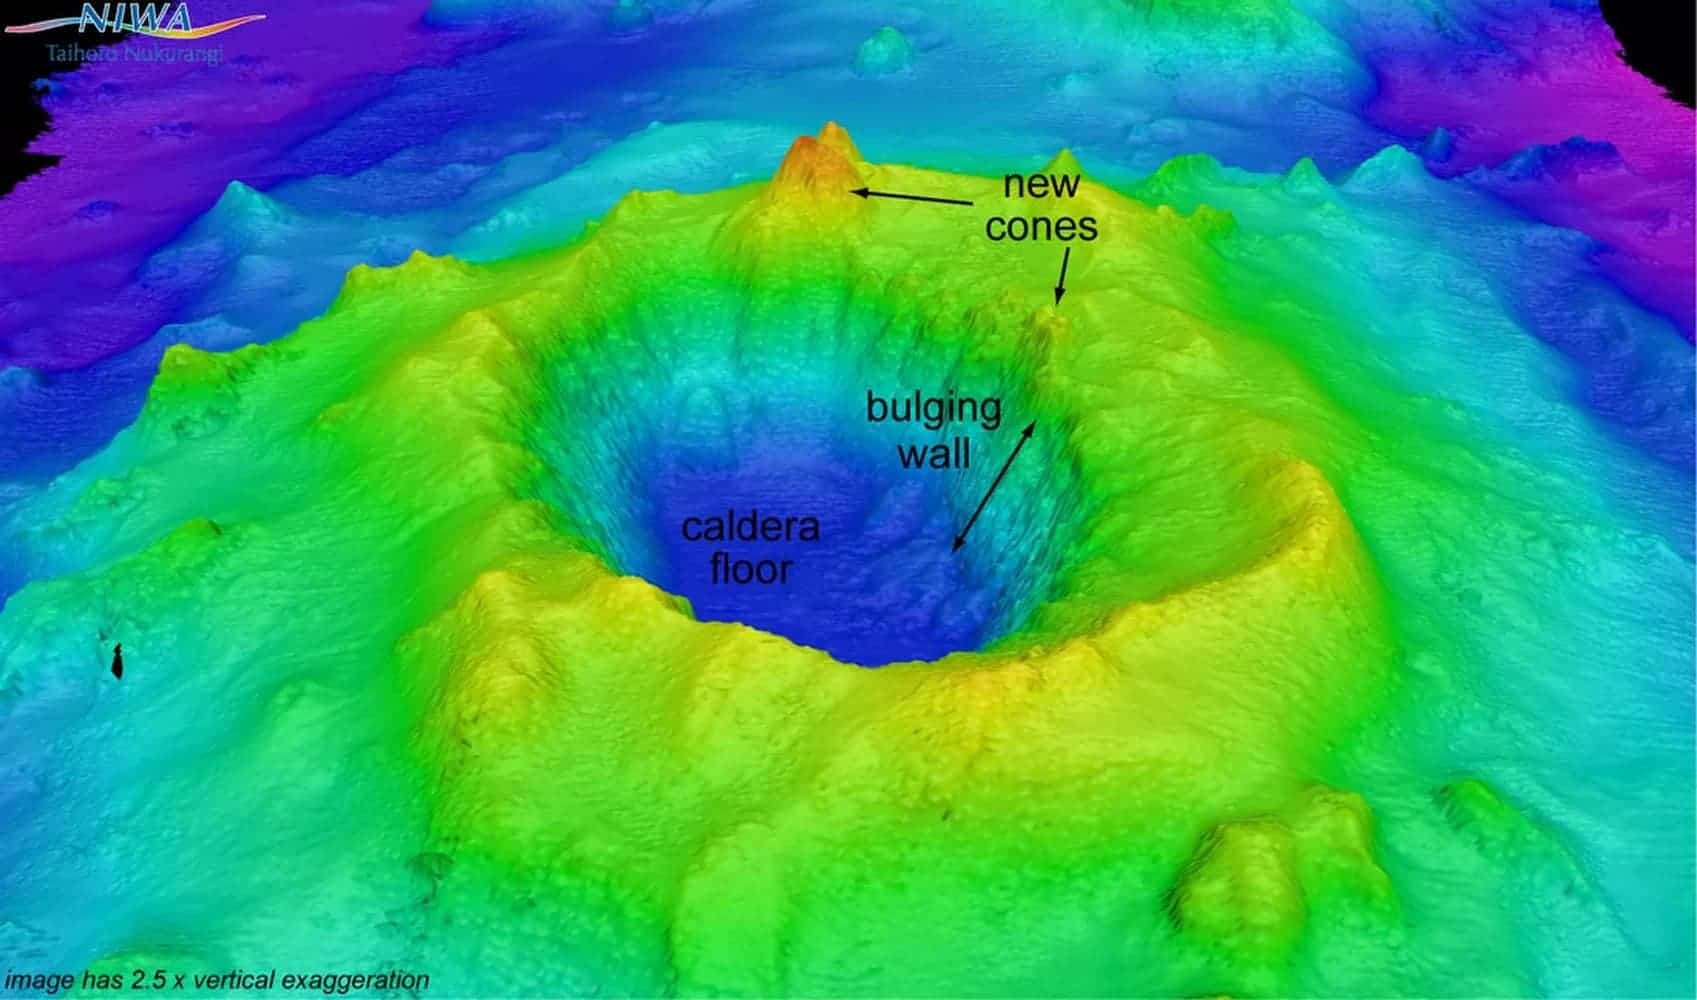 An echosounder image showing the undersea volcano called Havre Seamount, including a new cone that formed during the July 2012 eruption. Credit: NIWA/GNS Science.